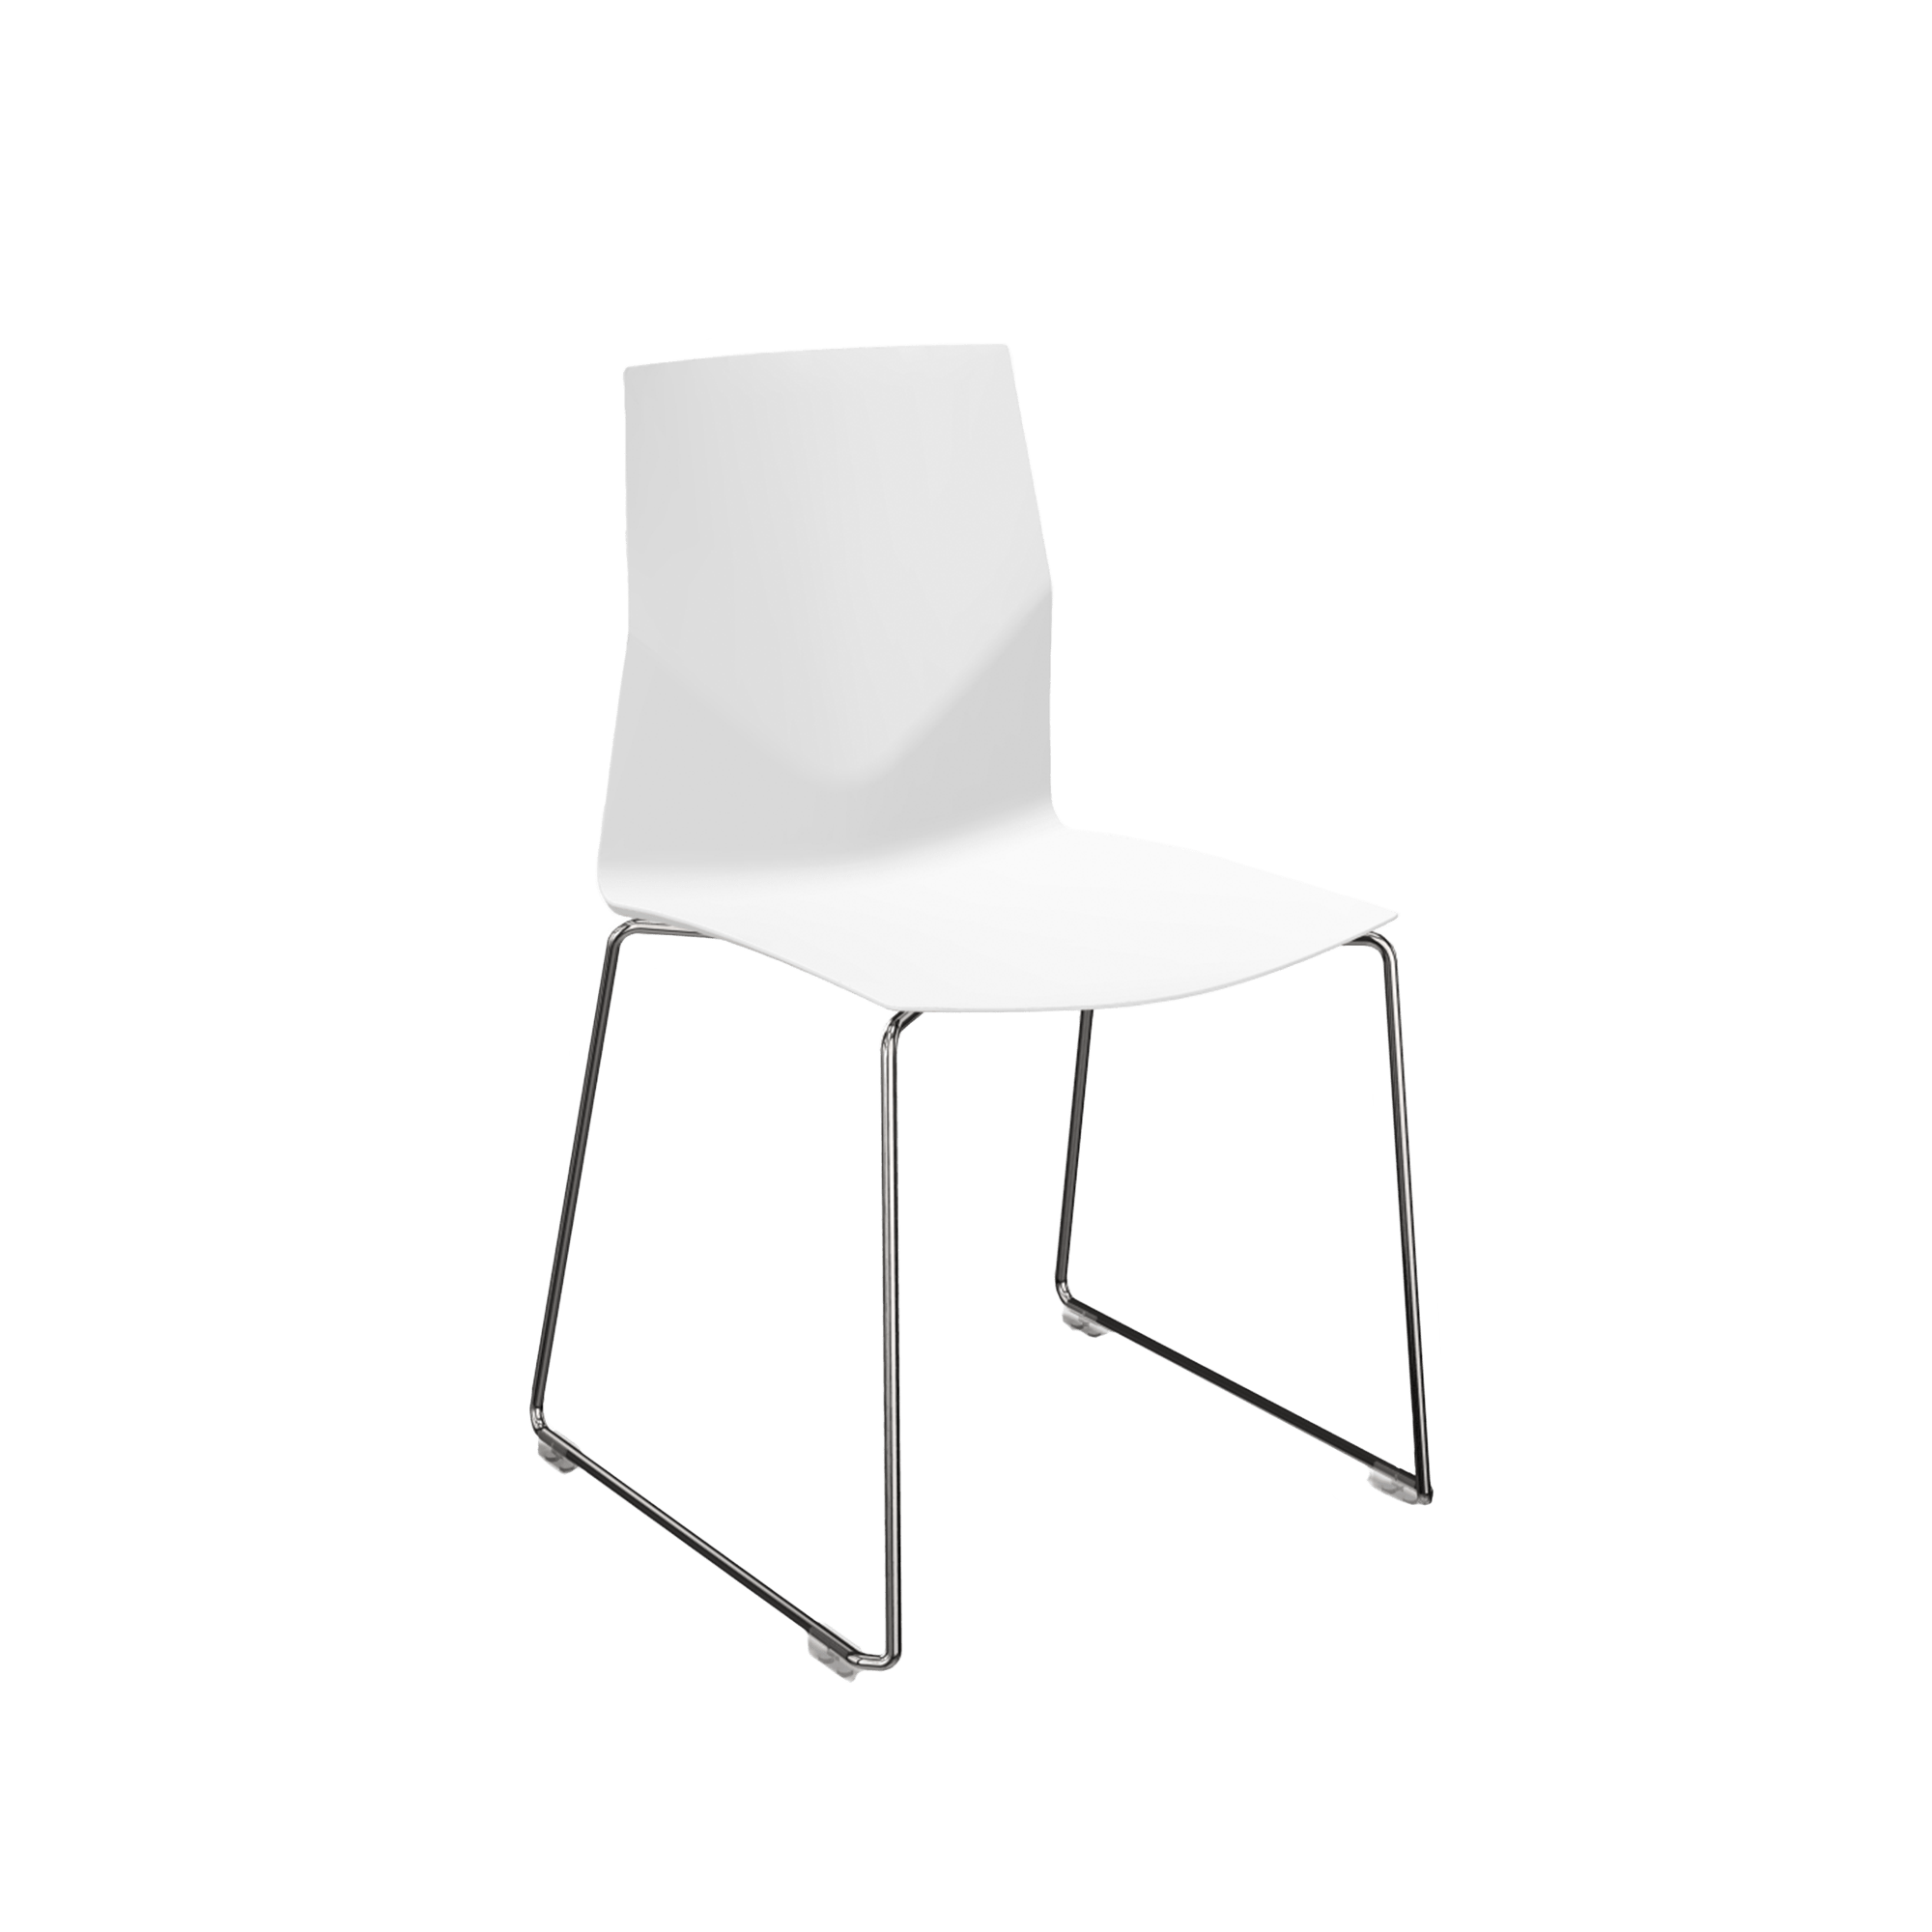 A white two legged chair with a white seat and chrome legs